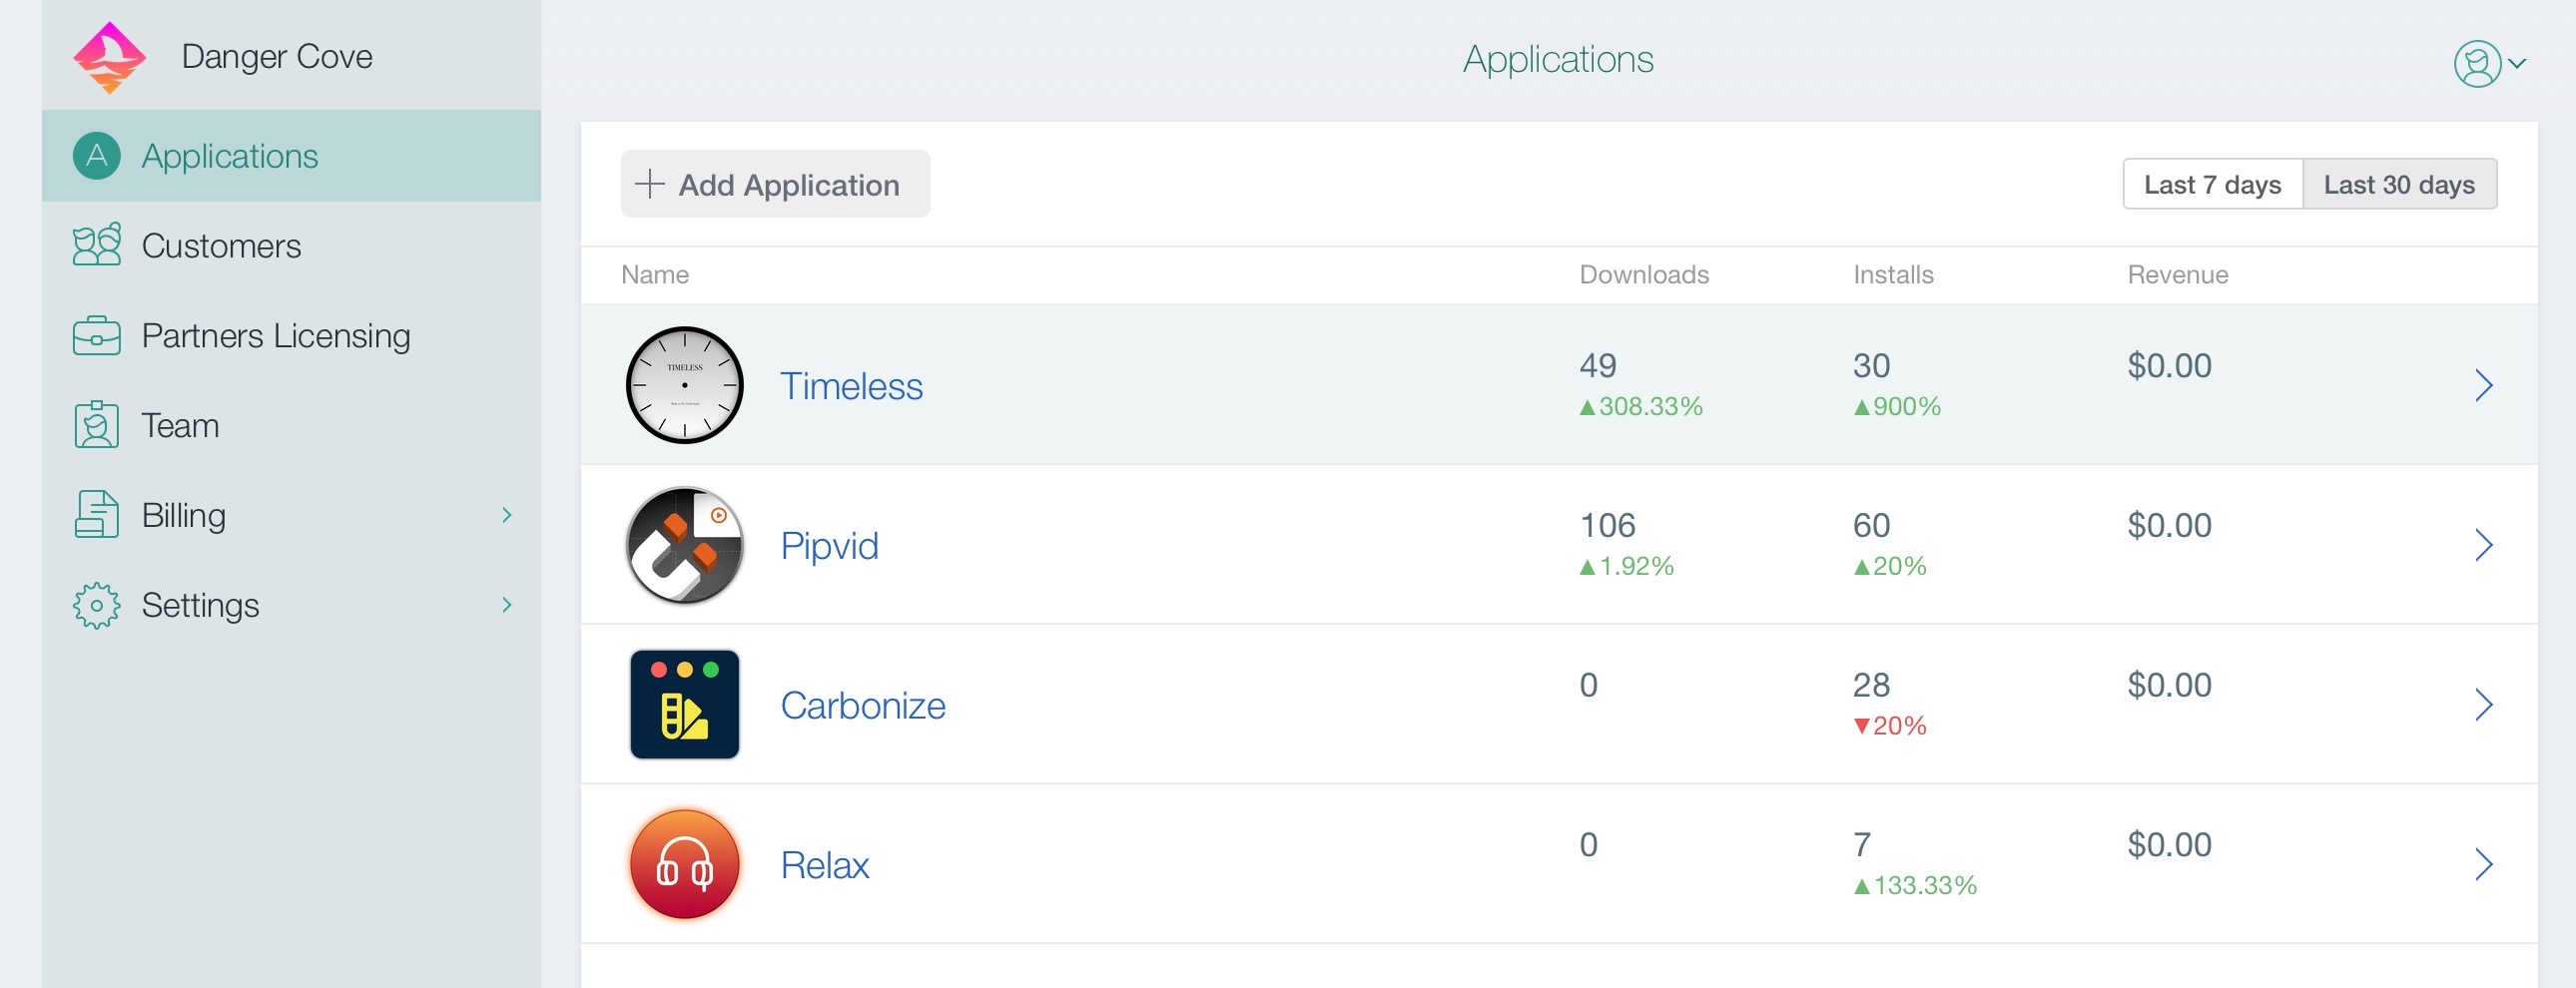 A screenshot of my DevMate dashboard, showing about 50 downloads and 30 installs for Timeless in the past 30 days and 100 downloads and 60 installs for Pipvid